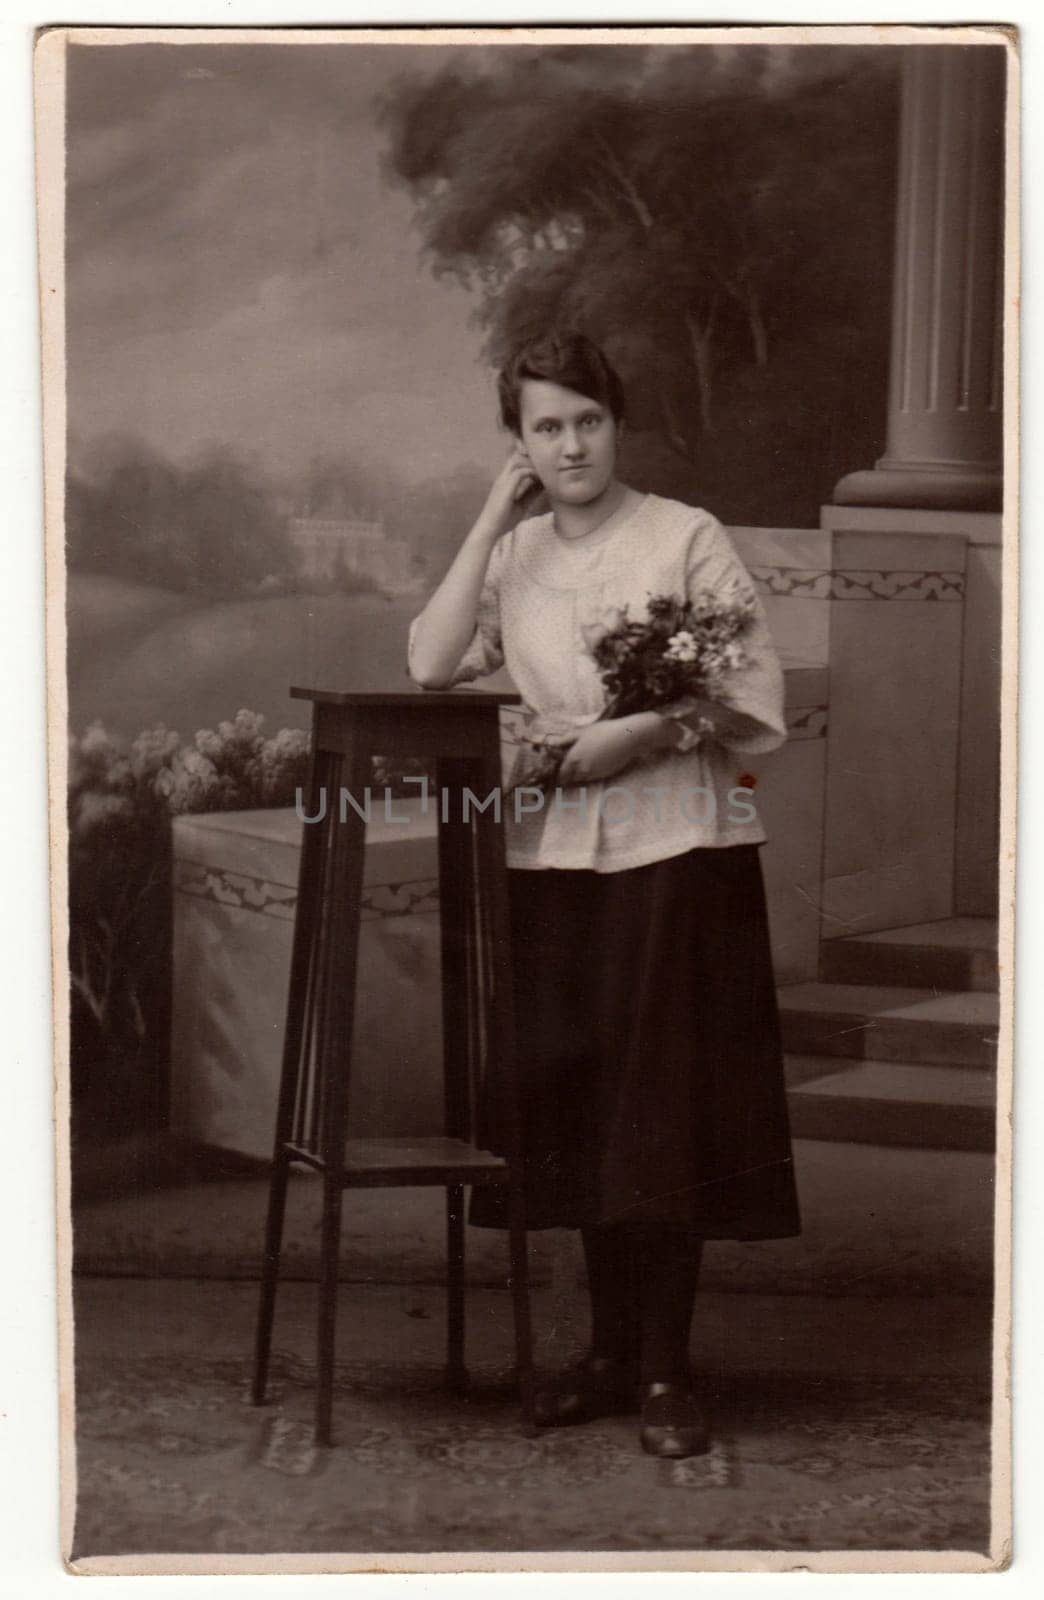 GERMANY - CIRCA 1930s: Vintage photo shows woman in a photography studio. Retro black and white studio photography with sepia effect.